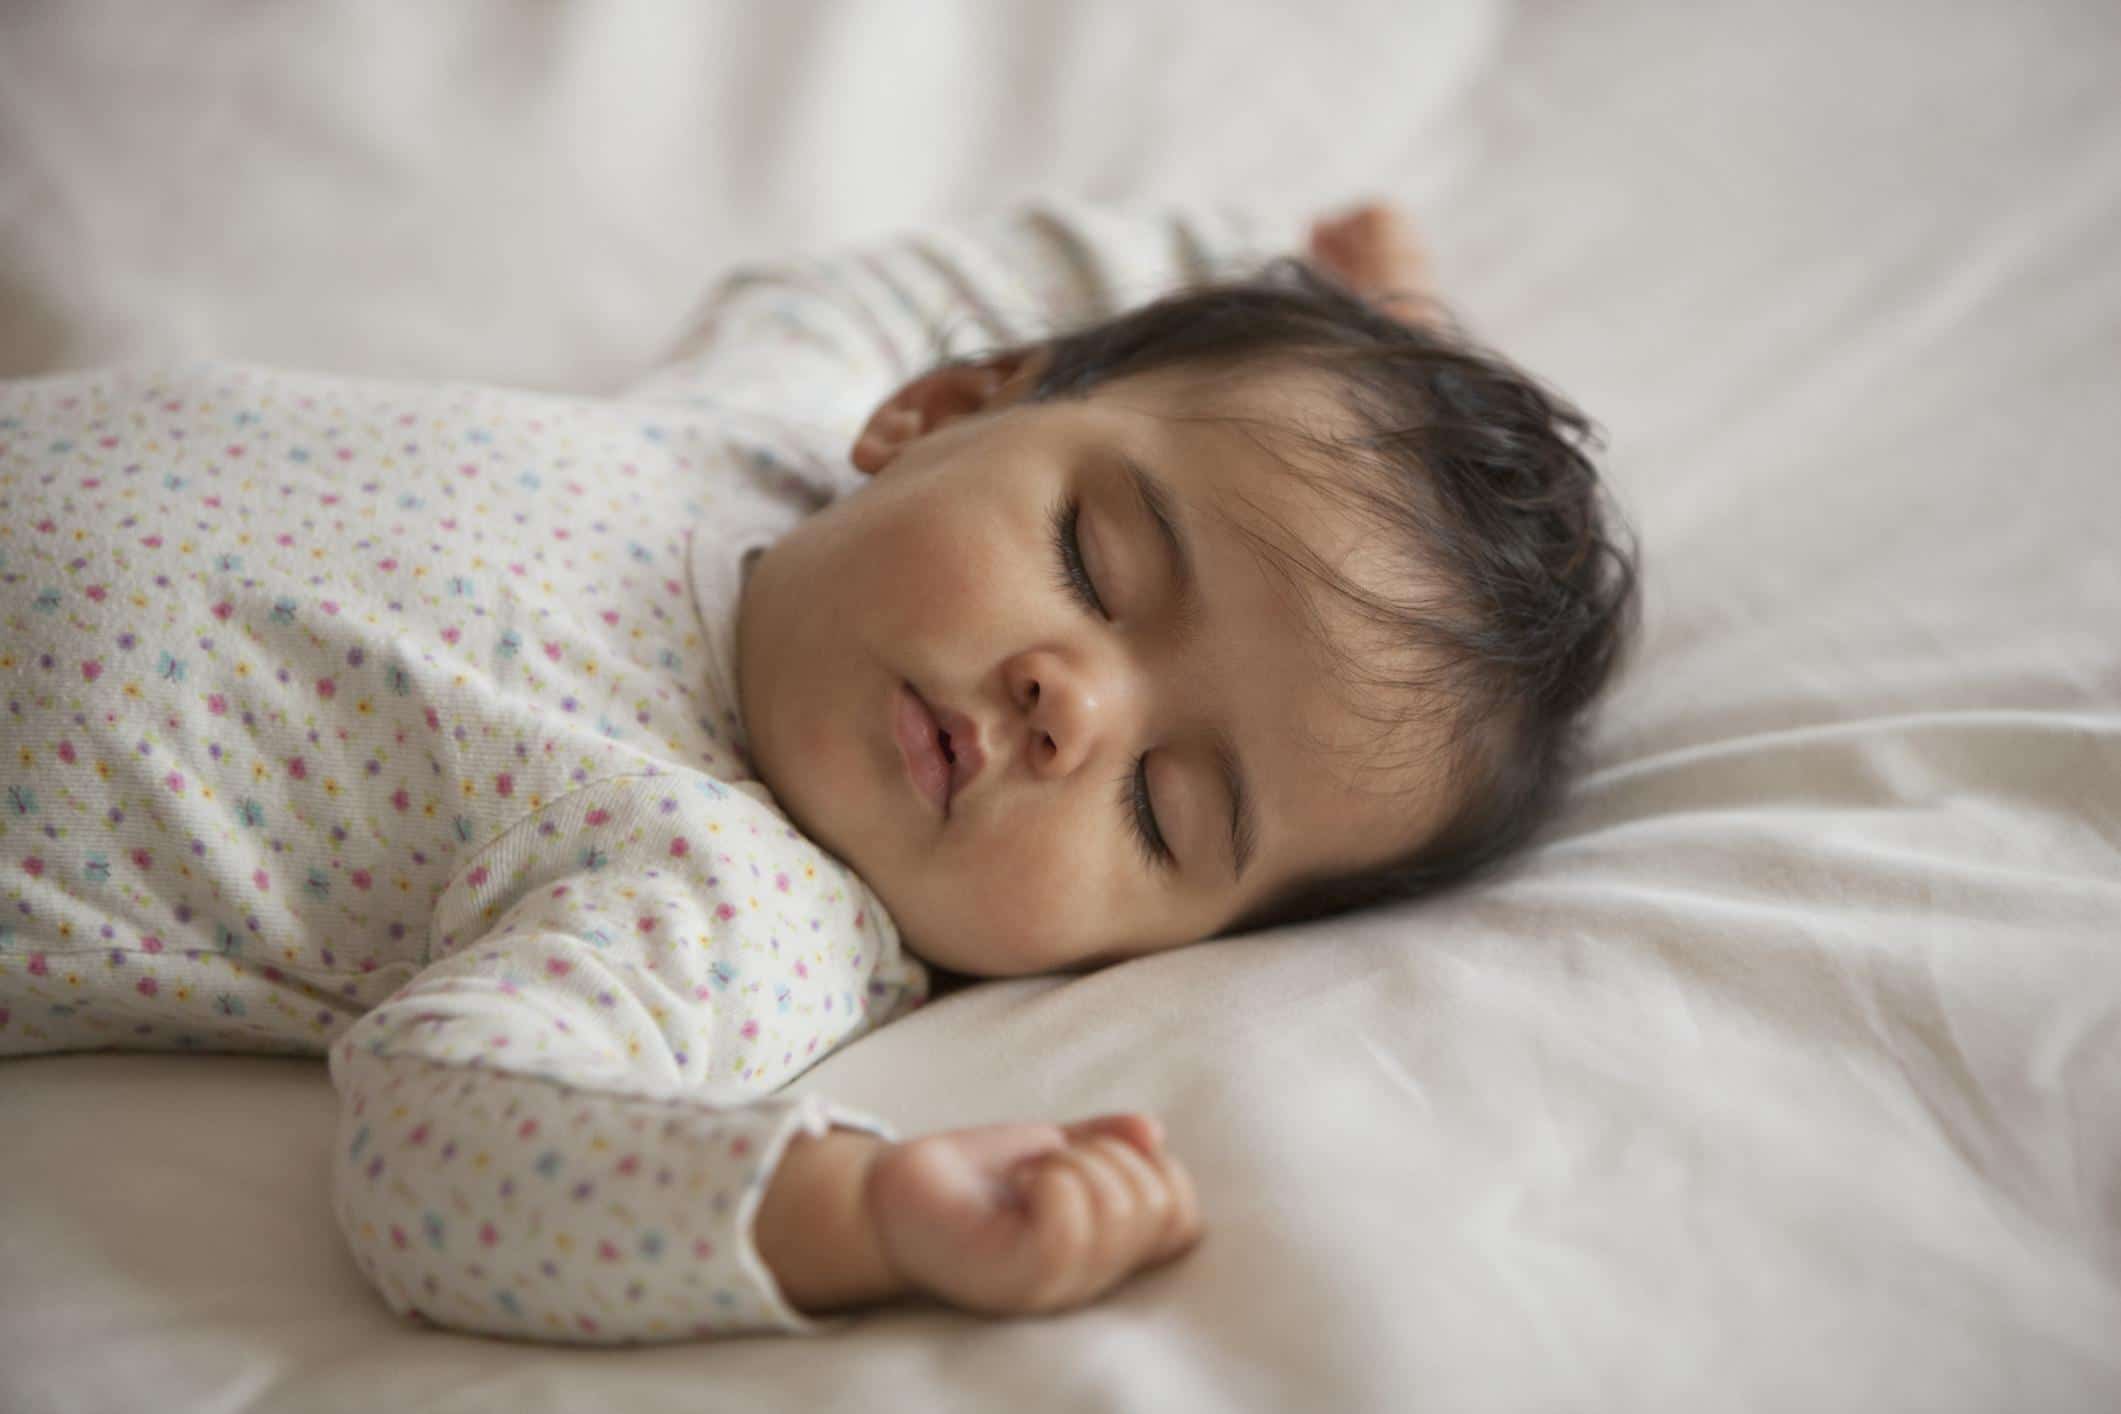 10-month-old baby sleeping on a bed